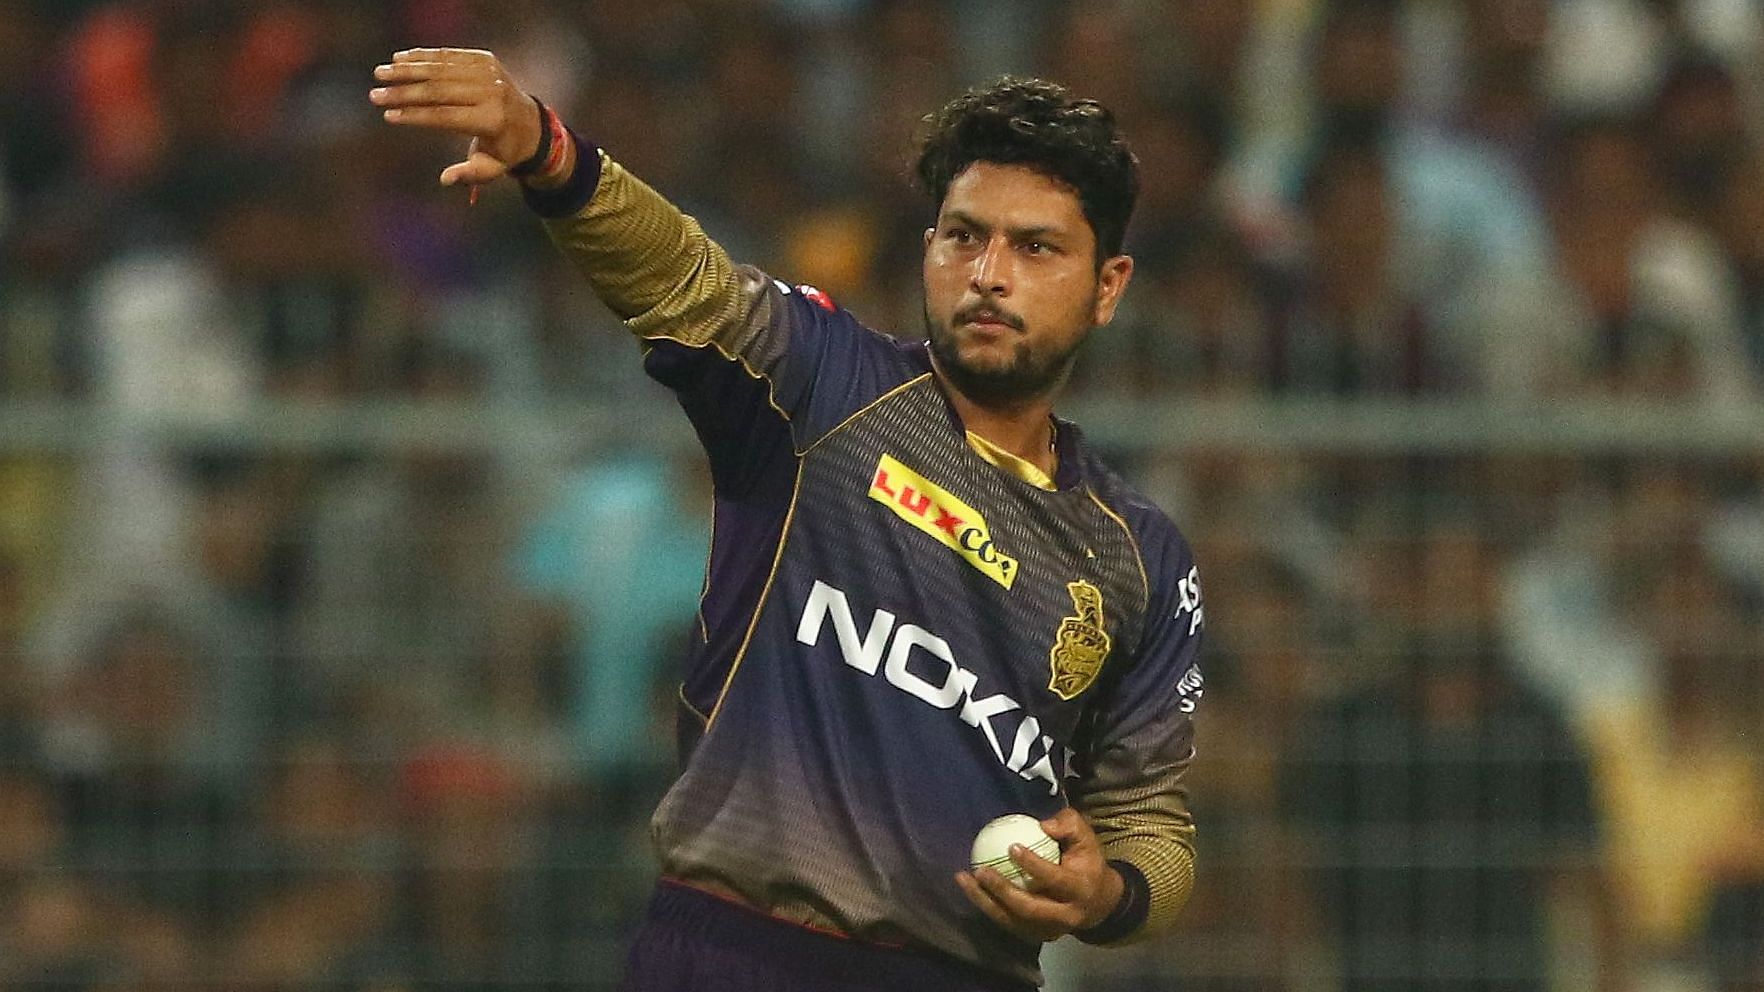 Kuldeep ended up giving 59 runs off his four overs in the match, which is the joint-most expensive spell by a spinner in IPL history.